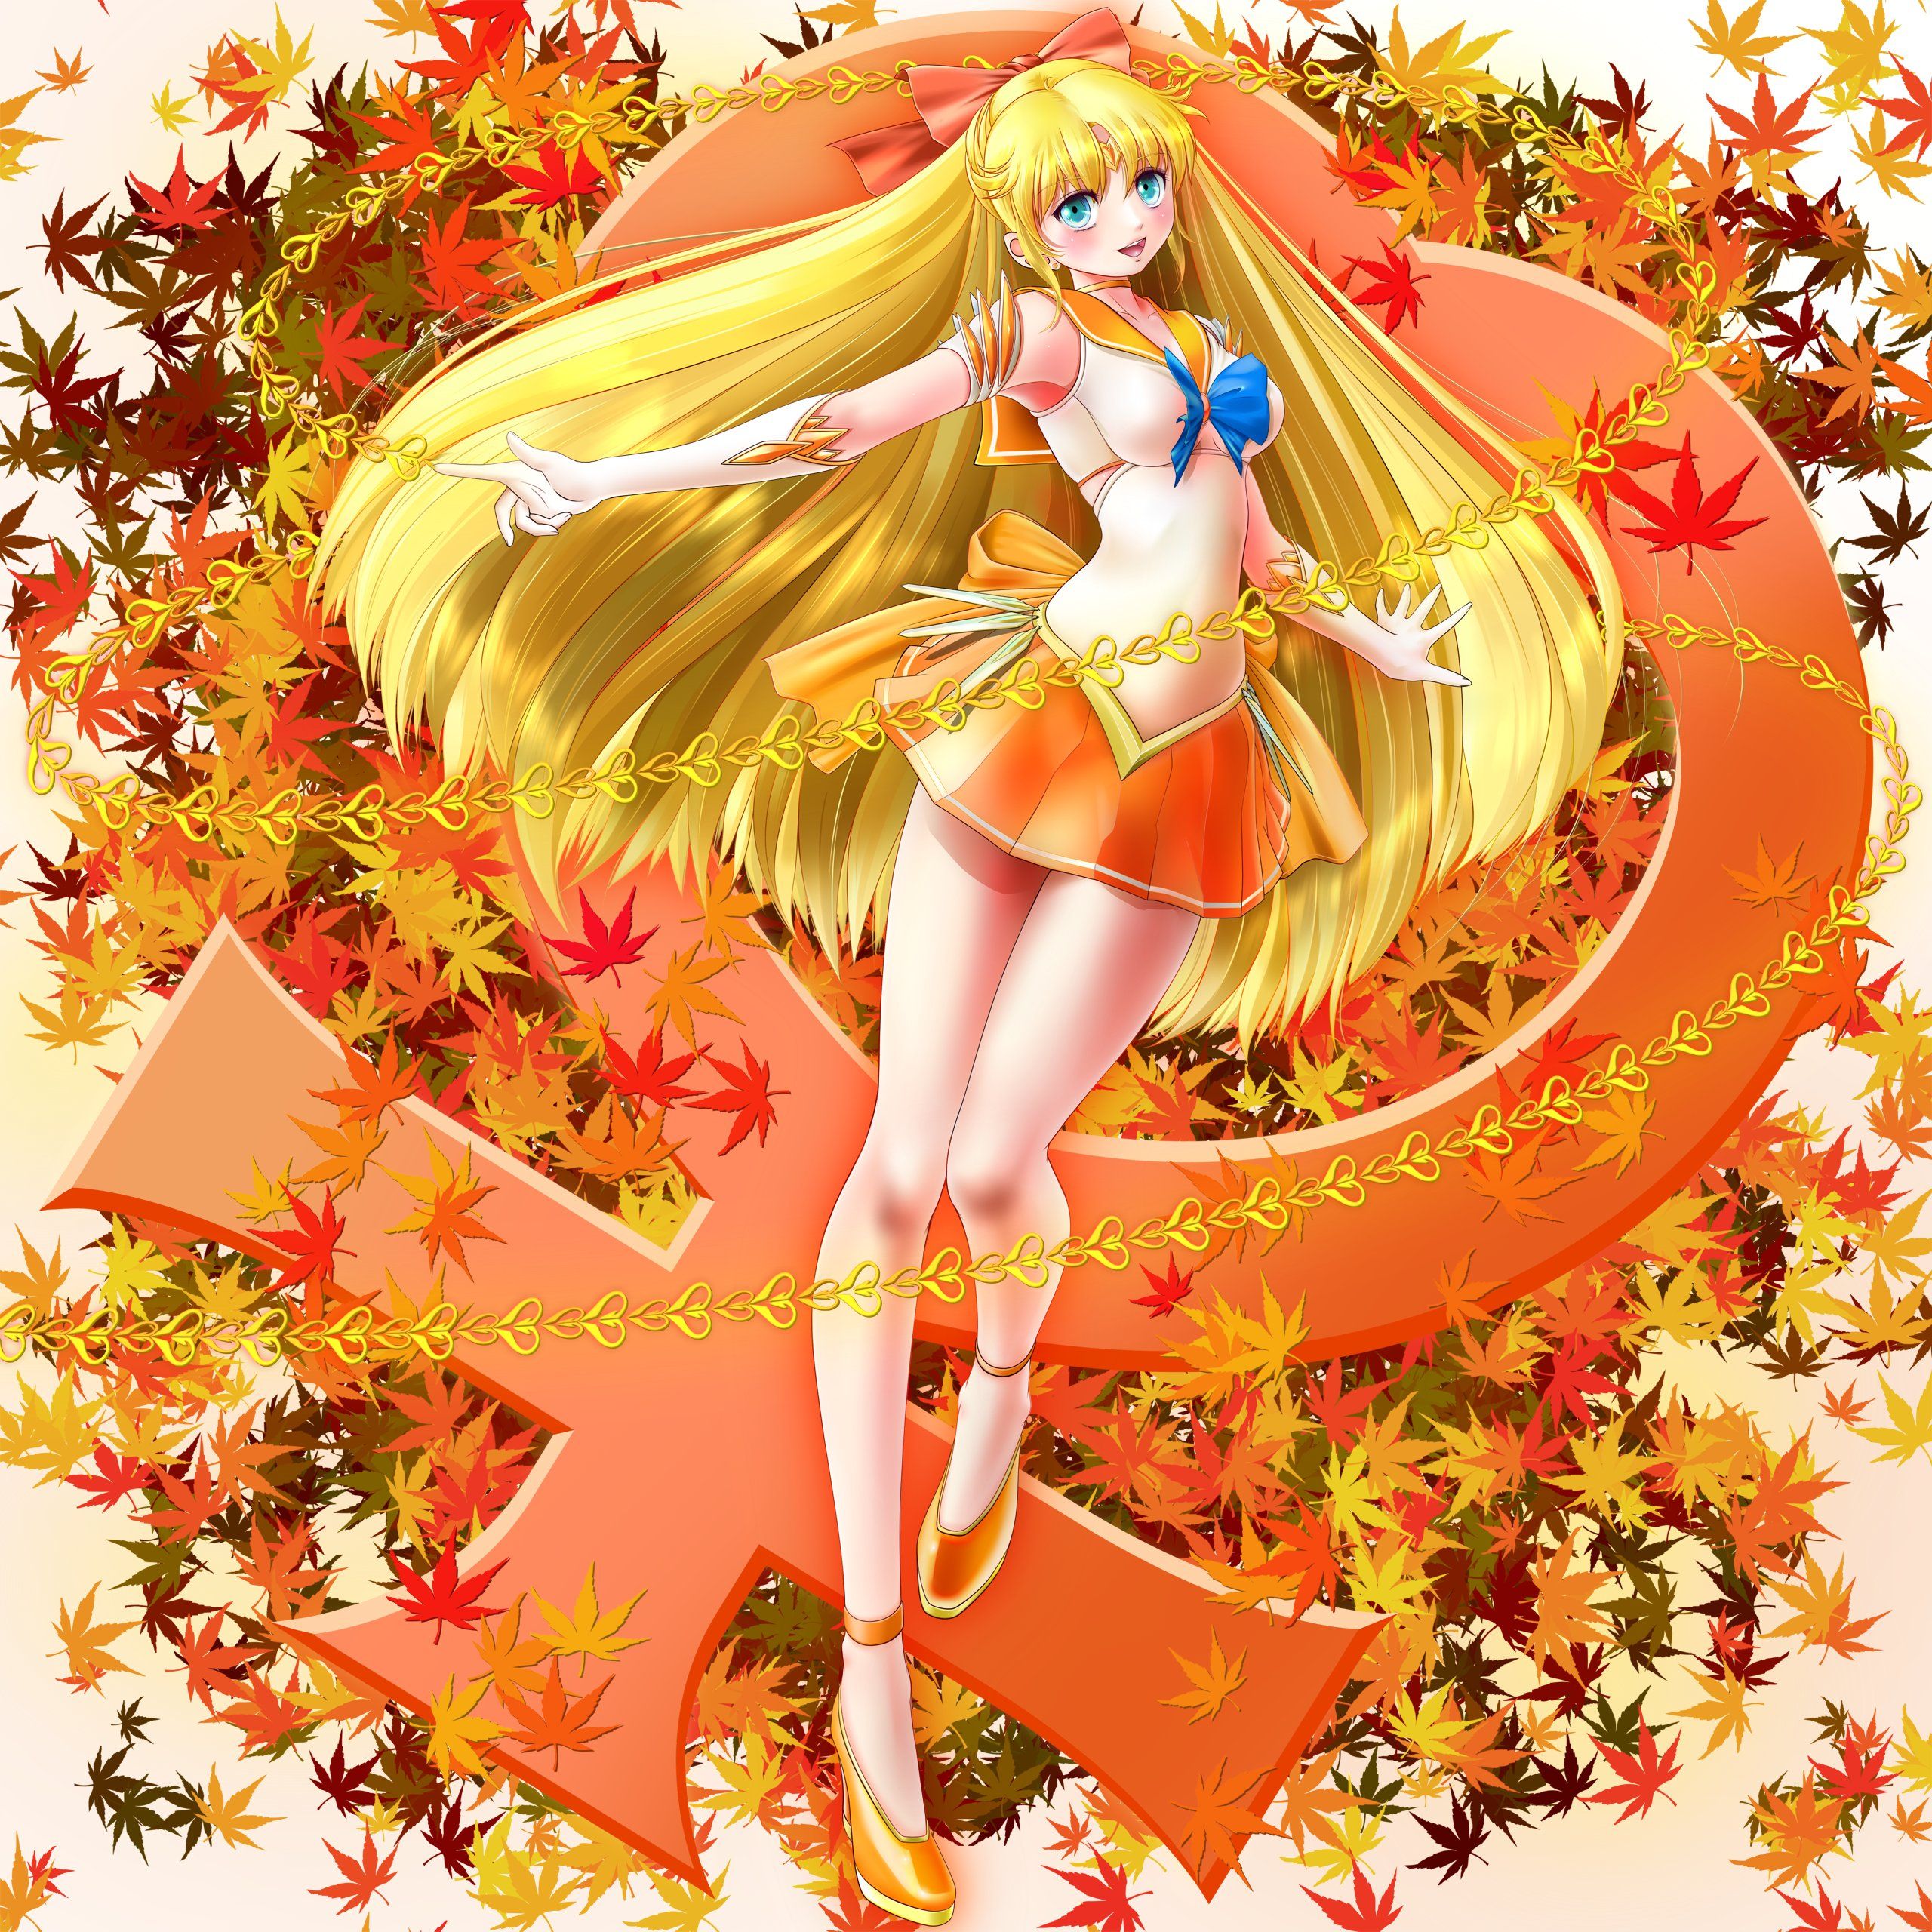 A blonde girl with long hair and blue eyes, wearing a short orange and white suit with a blue bow. She is surrounded by orange and red maple leaves. - Sailor Venus